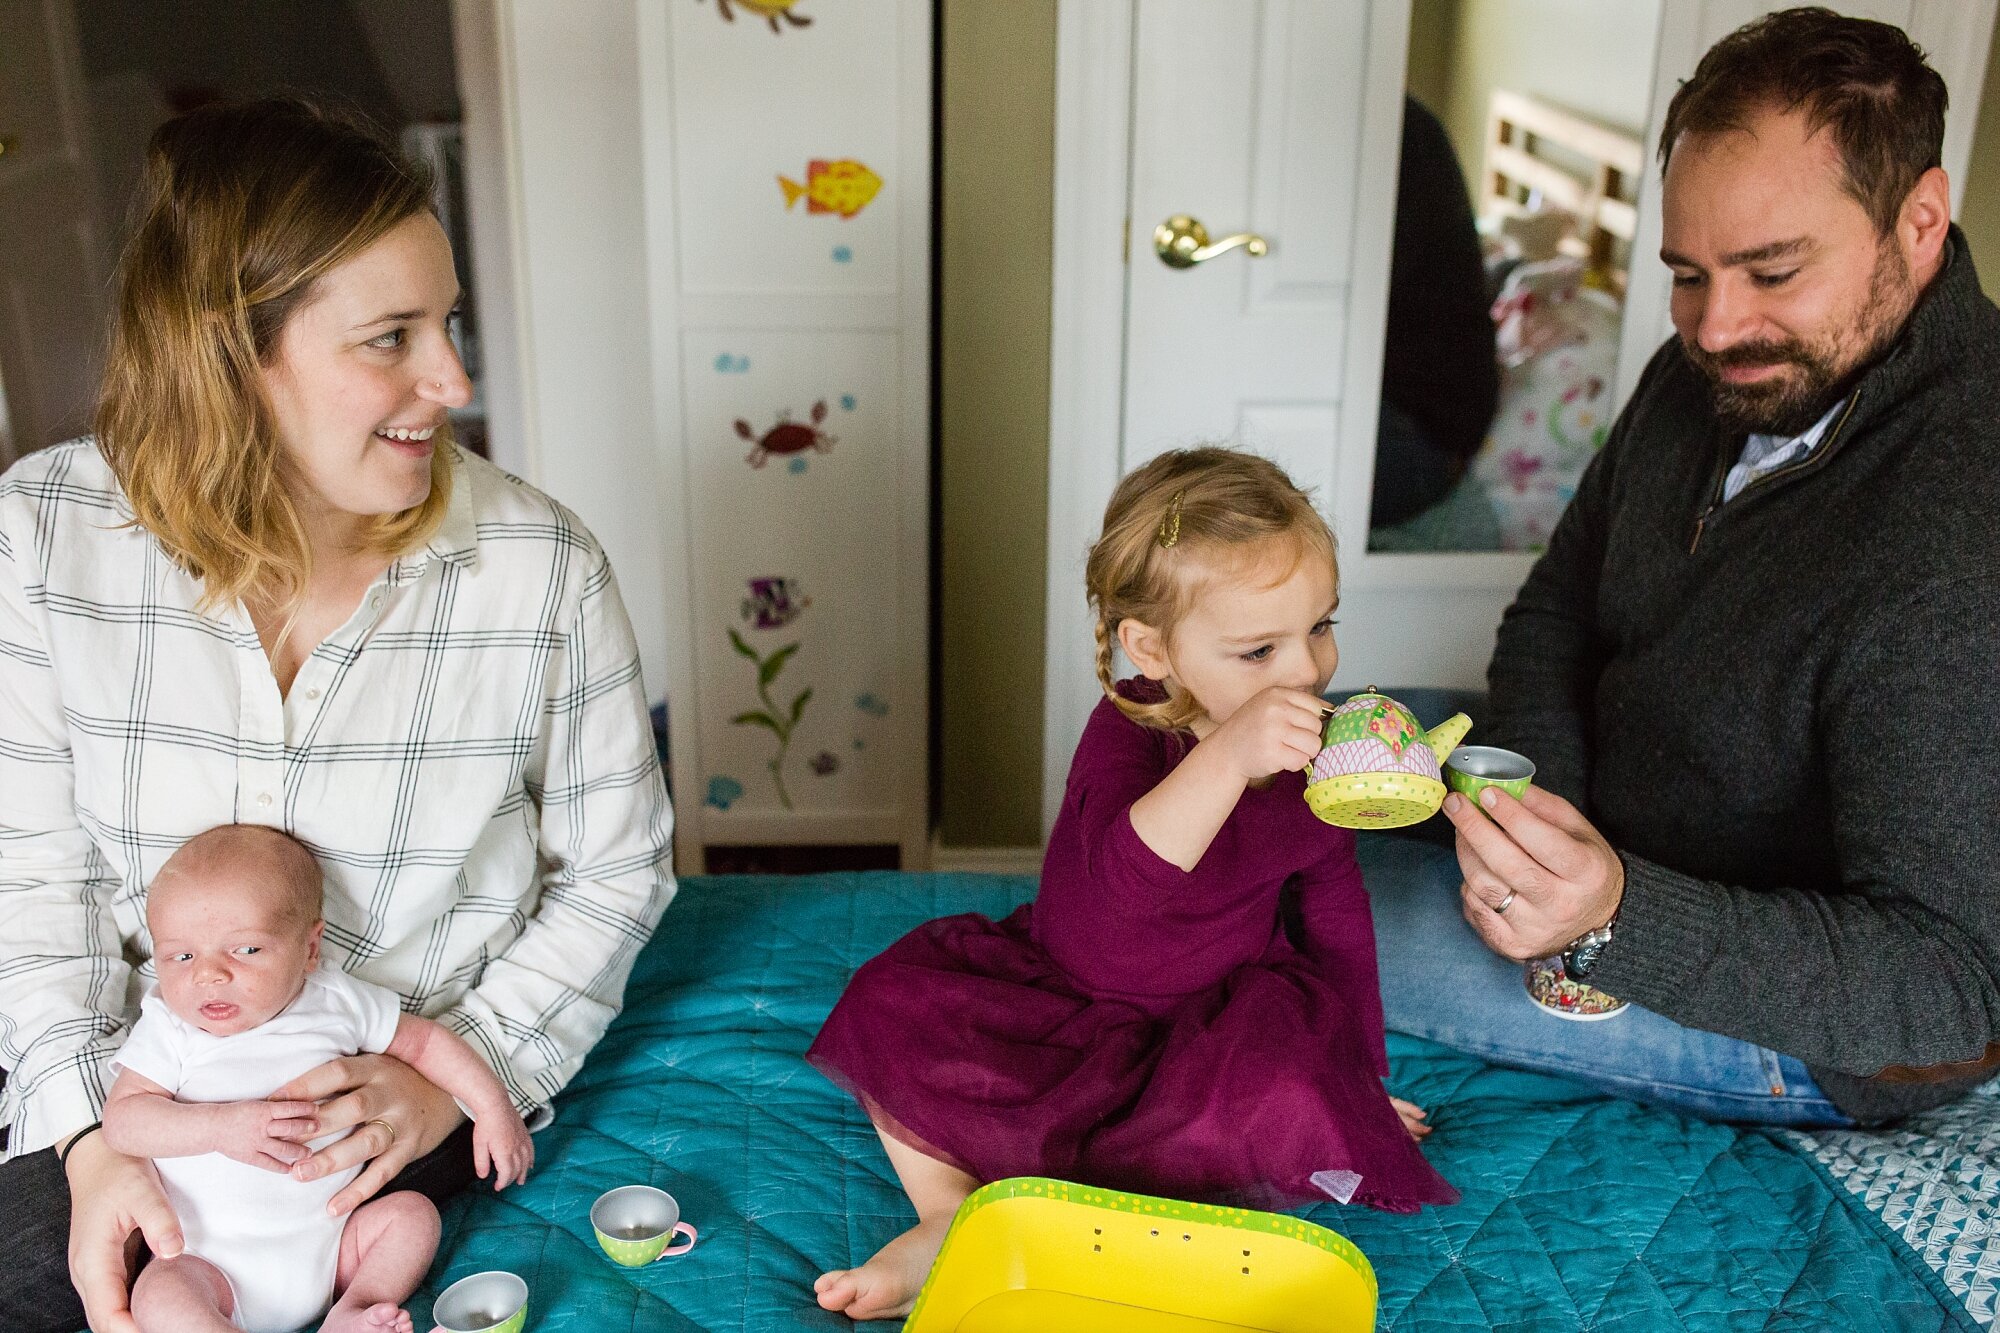 Toddler girl serves tea to her parents while baby brother watches, Philadelphia newborn photographer